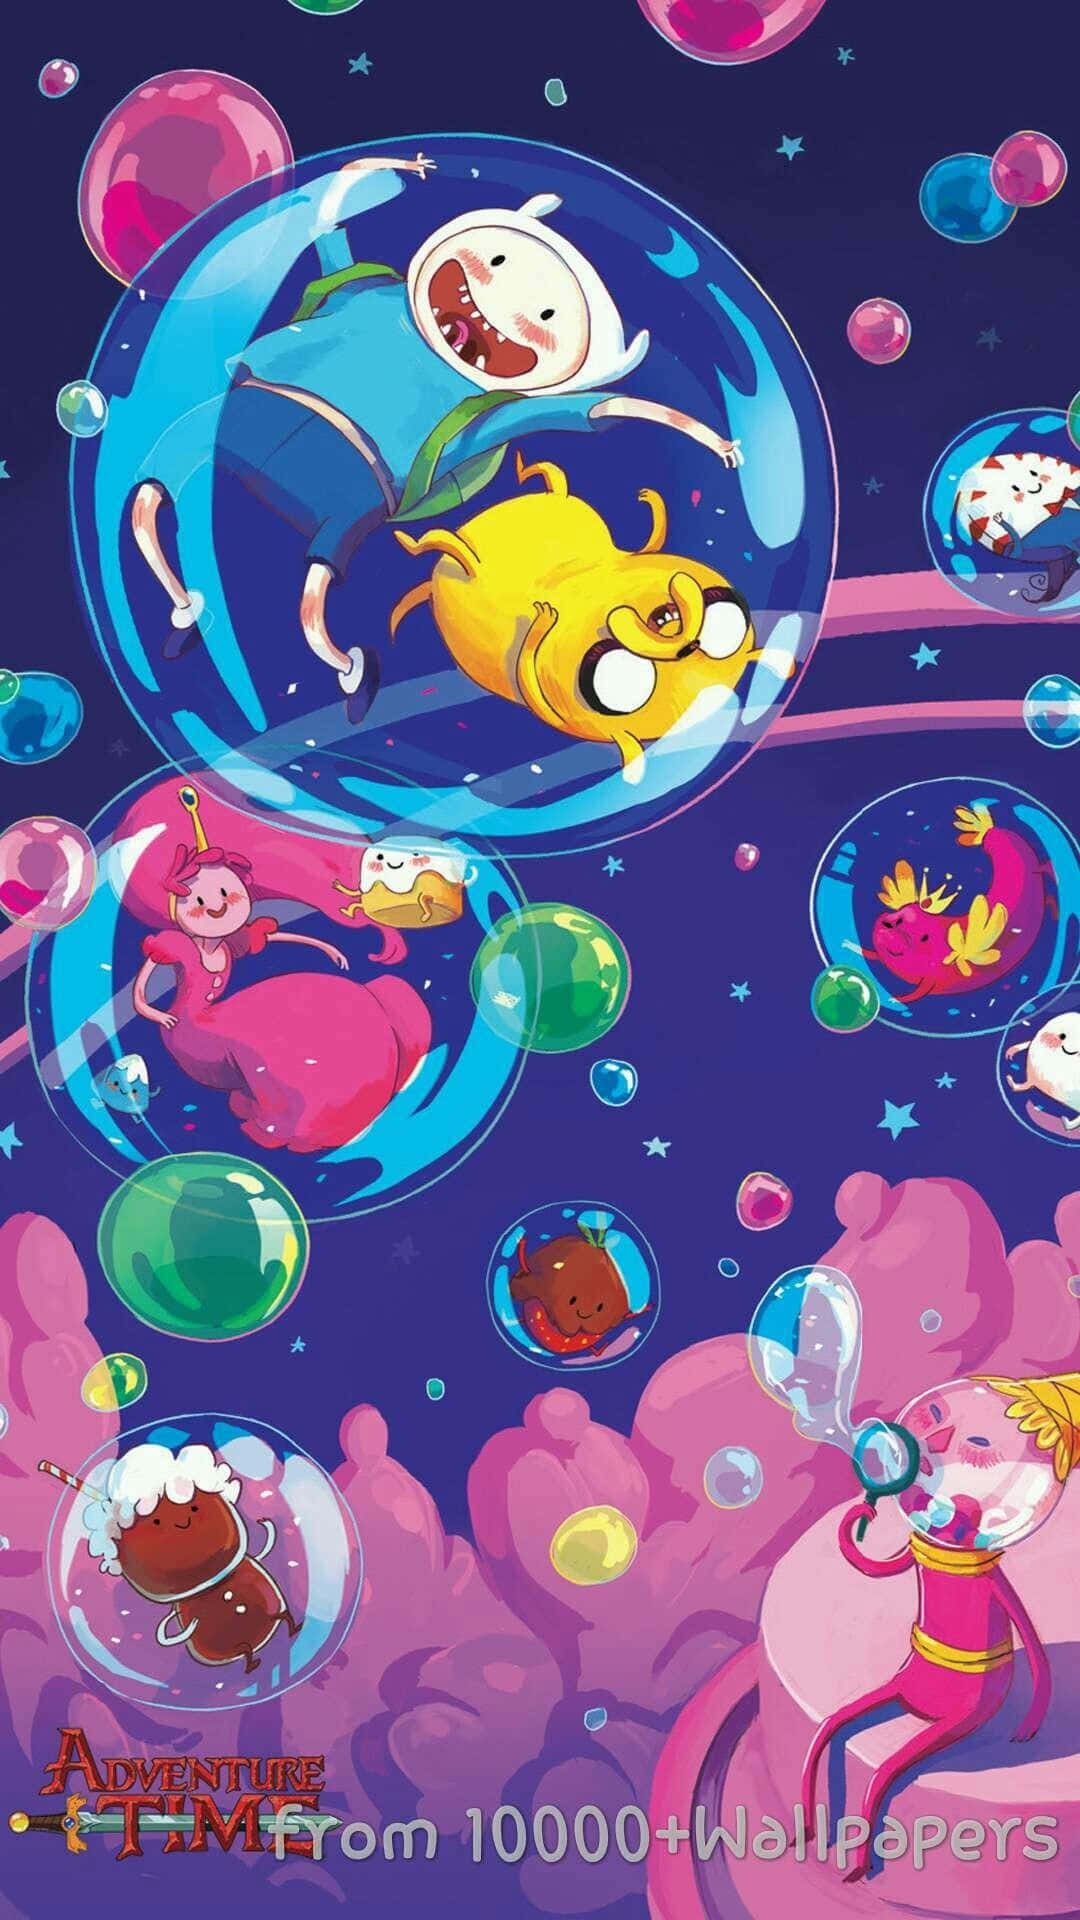 Get ready for an 'Adventure Time' experience with this iPhone wallpaper Wallpaper